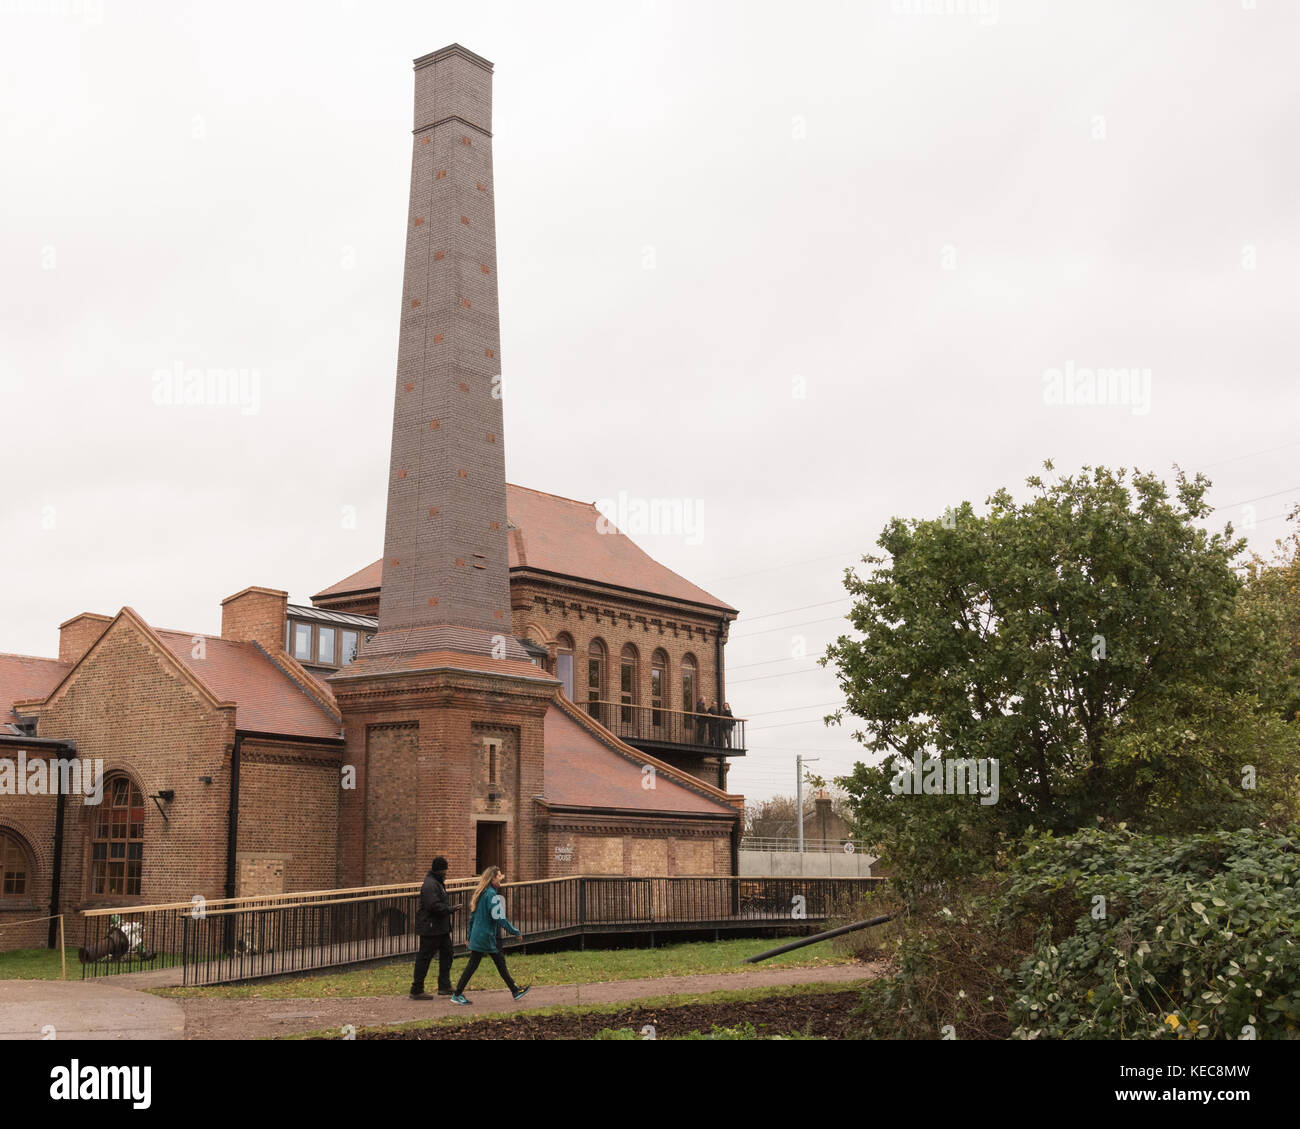 Walthamstow Wetlands opens to the public for the first time. Here we see people enjoying the newly refurbished Victorian Engine House, which has become the new visitor centre and cafe.Credit: Patricia Phillips/ Alamy Live news Stock Photo